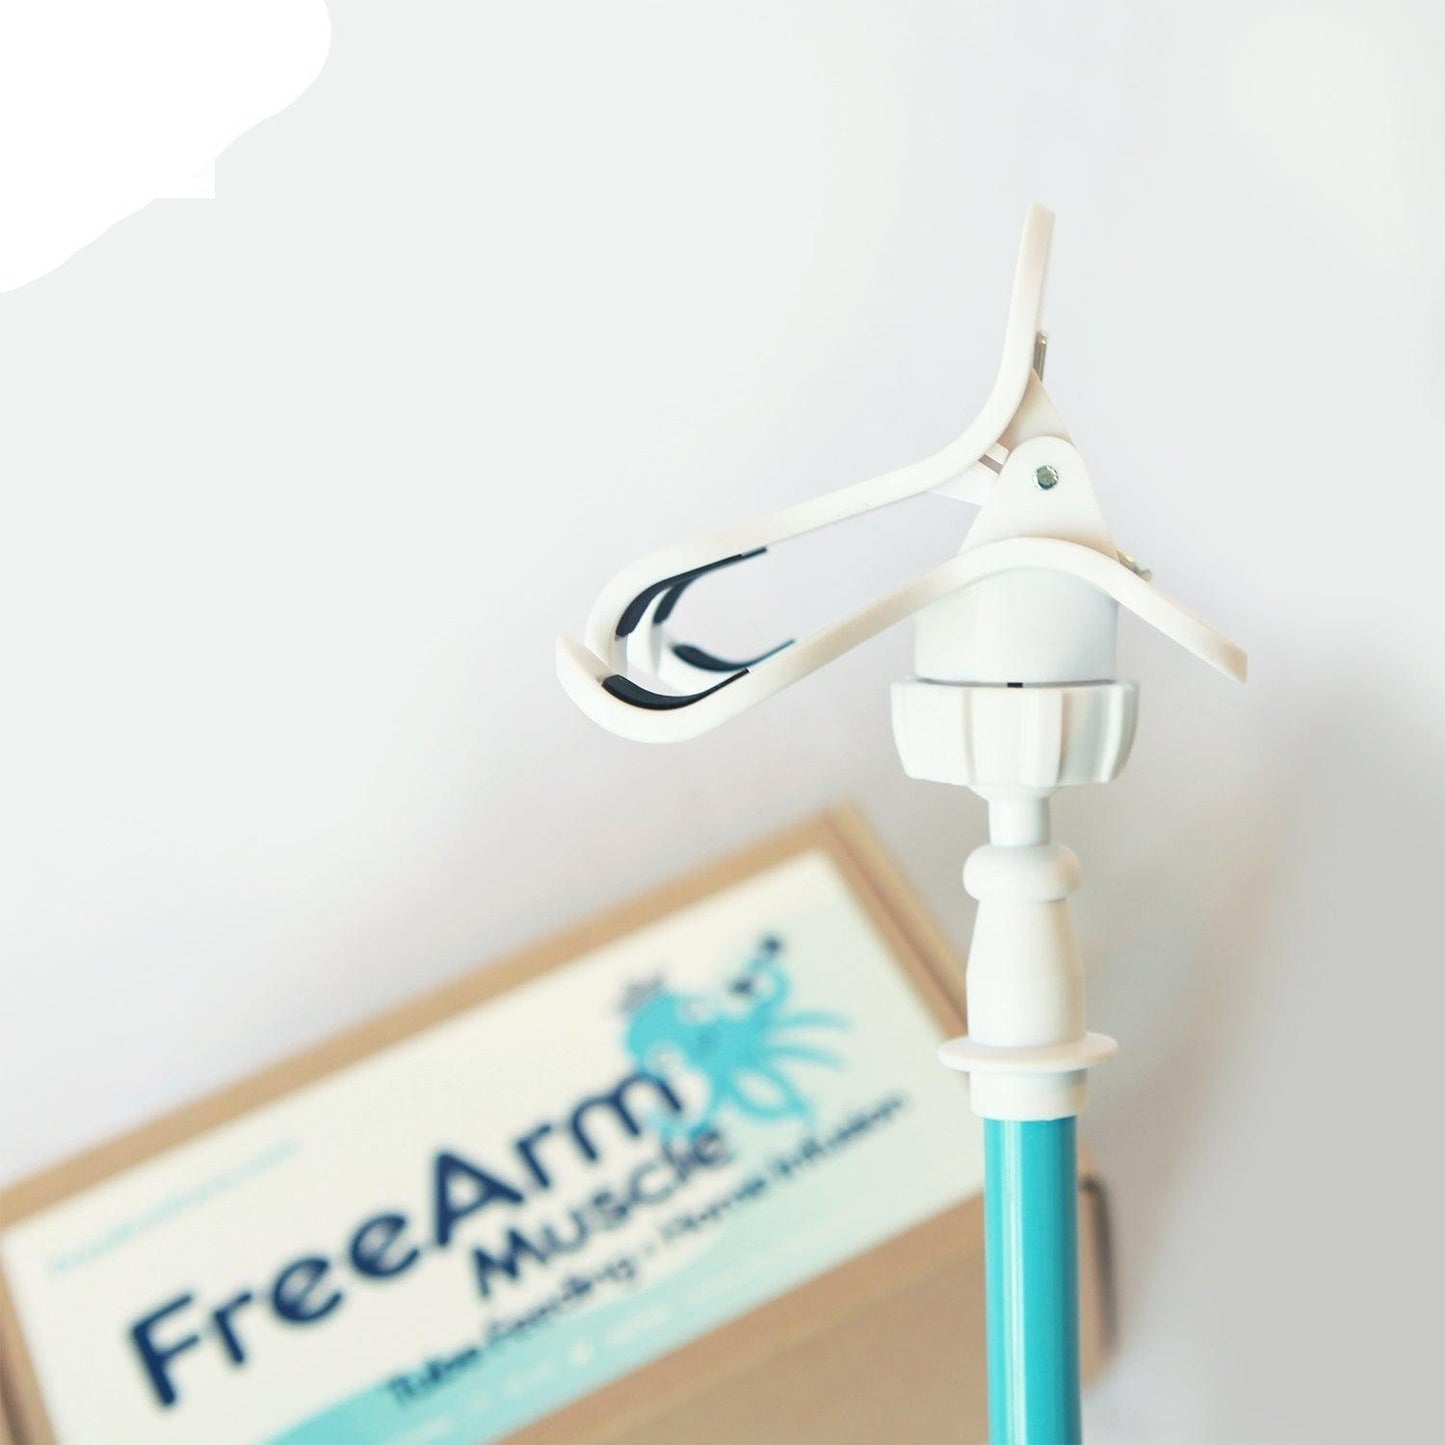 FreeArm Muscle Tube Feeding device and accessories - Anjelstore 